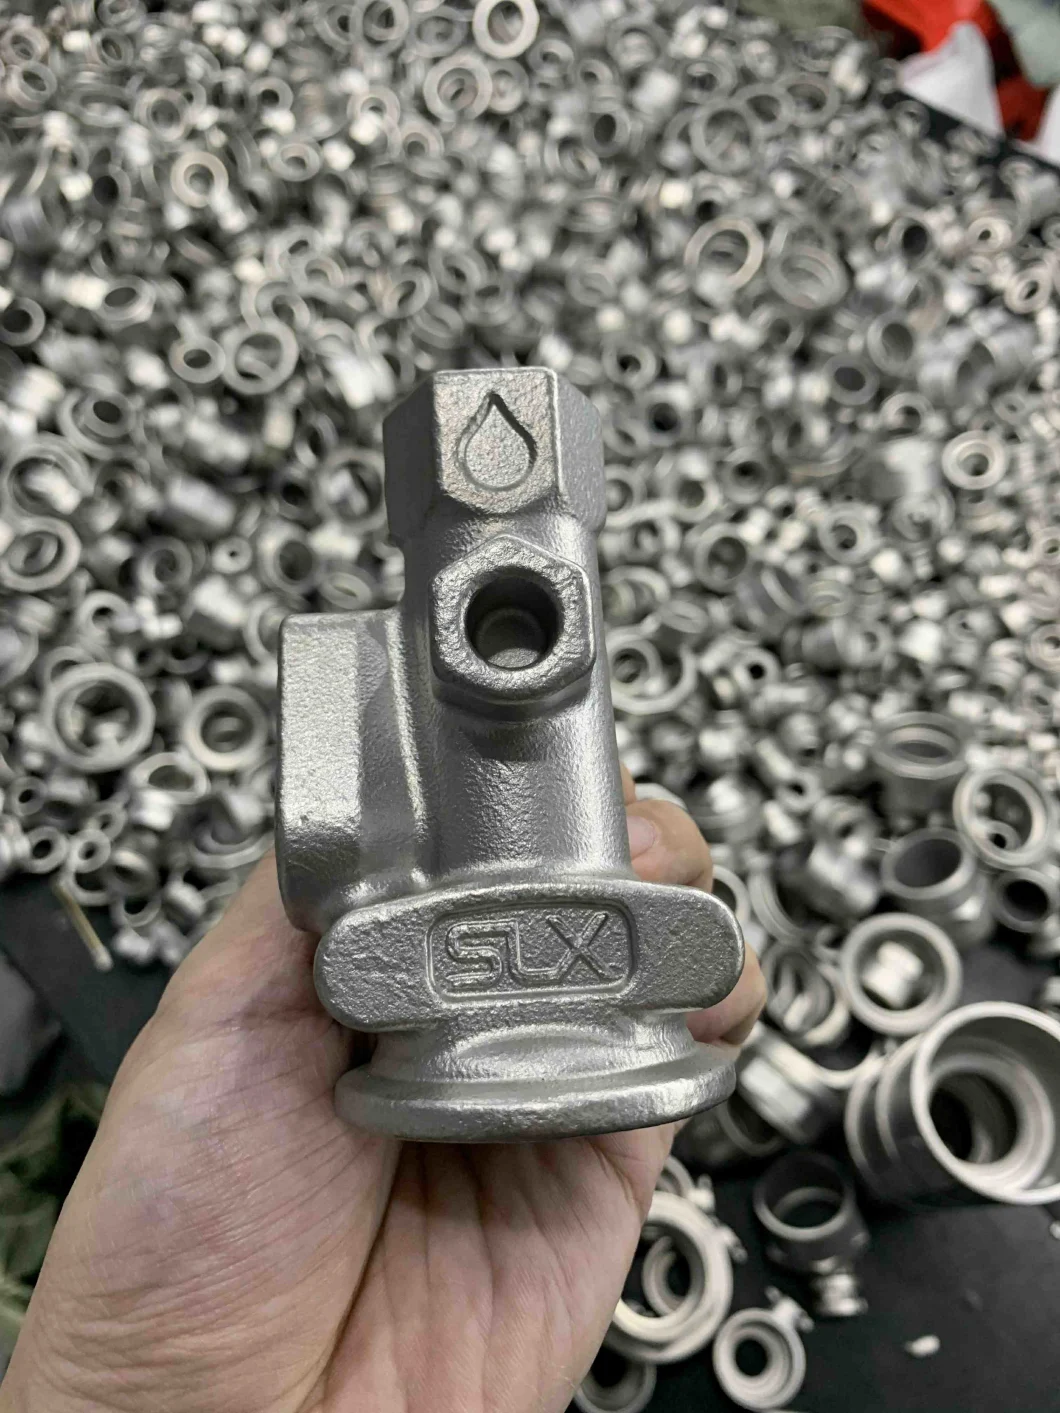 OEM Stainless Steel Customize Investment Casting Gi/Electrical/Light/Bulkhead/Hardware/Plumbing/Hydraulic/Bathroom/Sanitary/Furniture/Tube/Pipe/Glass Fittings